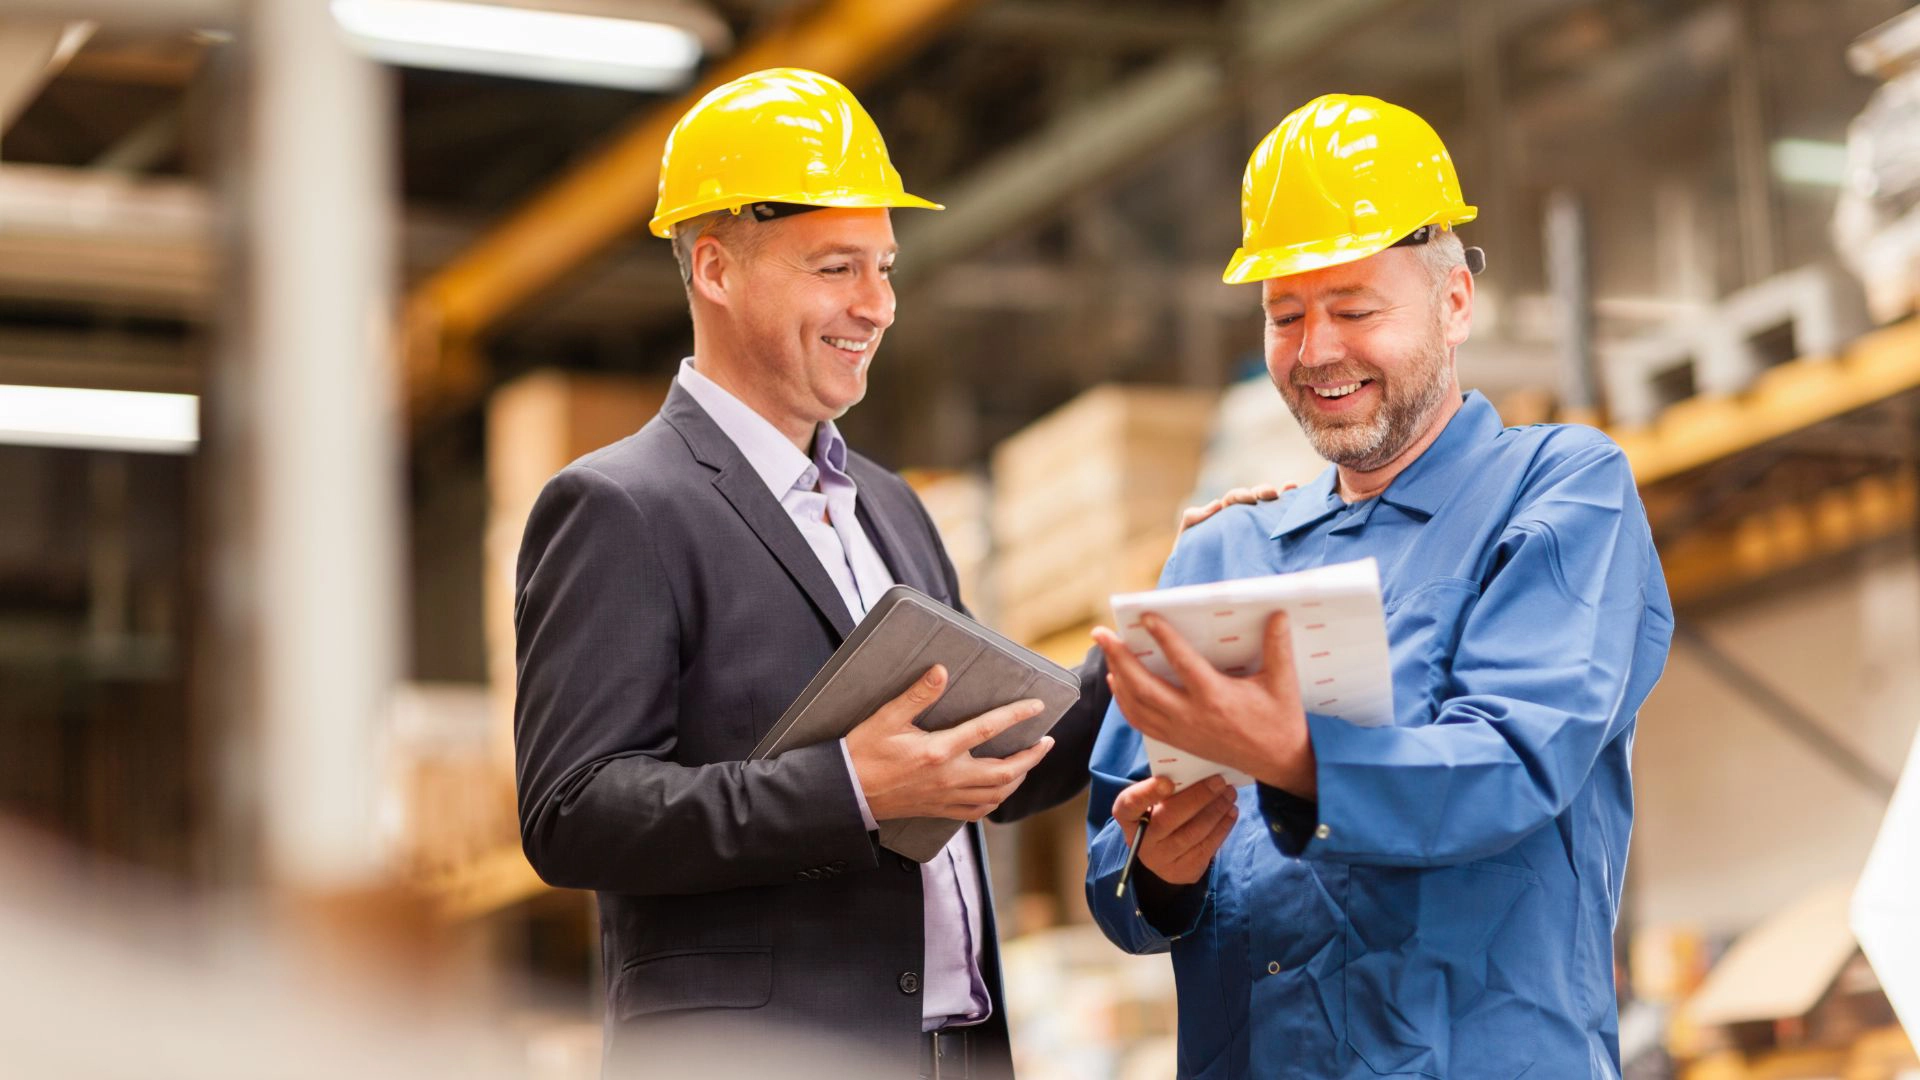 Two workers in hard hats talking in a warehouse